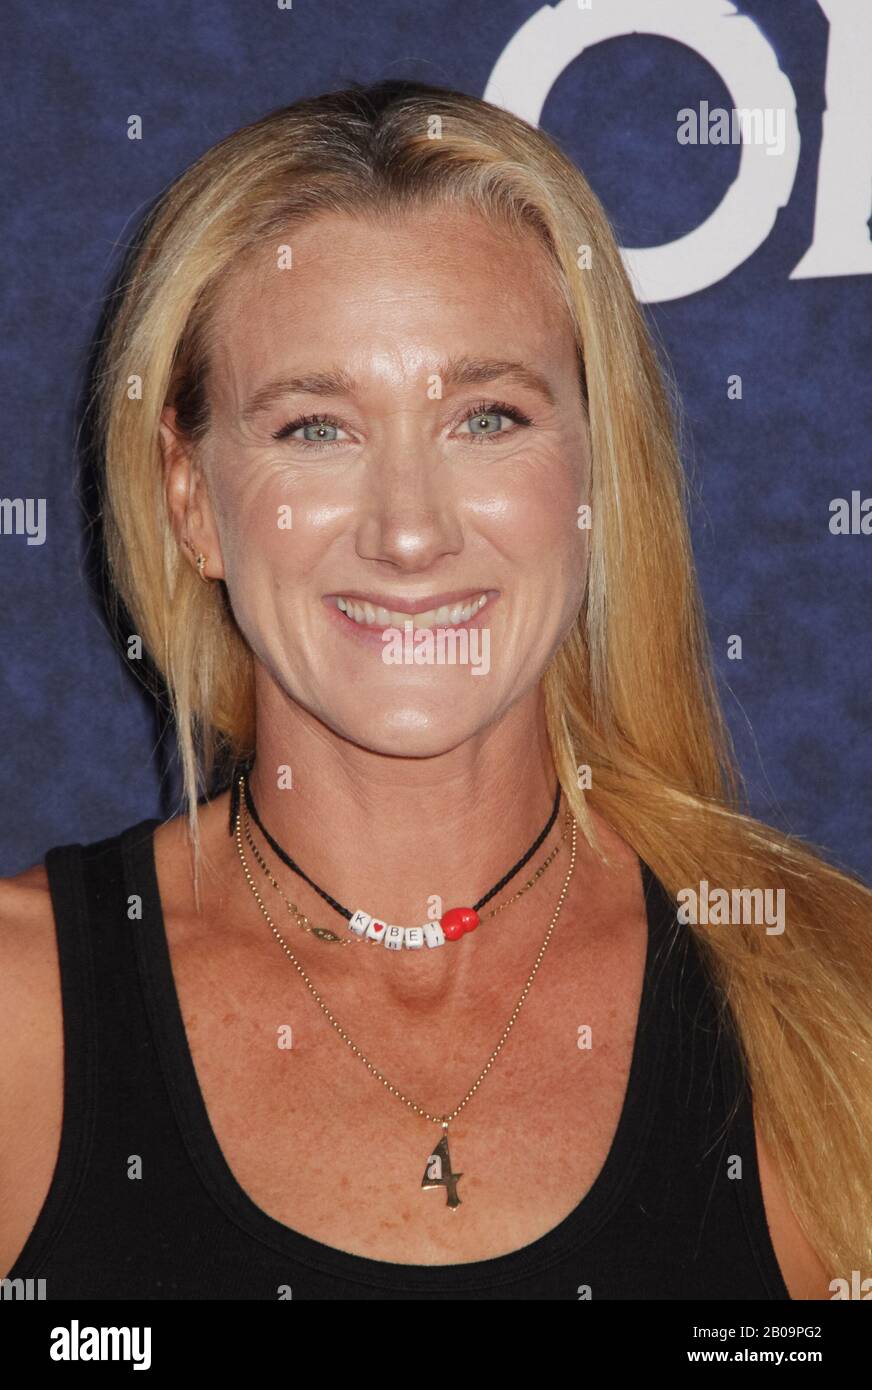 Kerri Walsh Jennings  02/18/2020 The World Premiere of "Onward" held at The El Capitan Theatre in Los Angeles, CA. Photo by I. Hasegawa / HNW / PictureLux Stock Photo